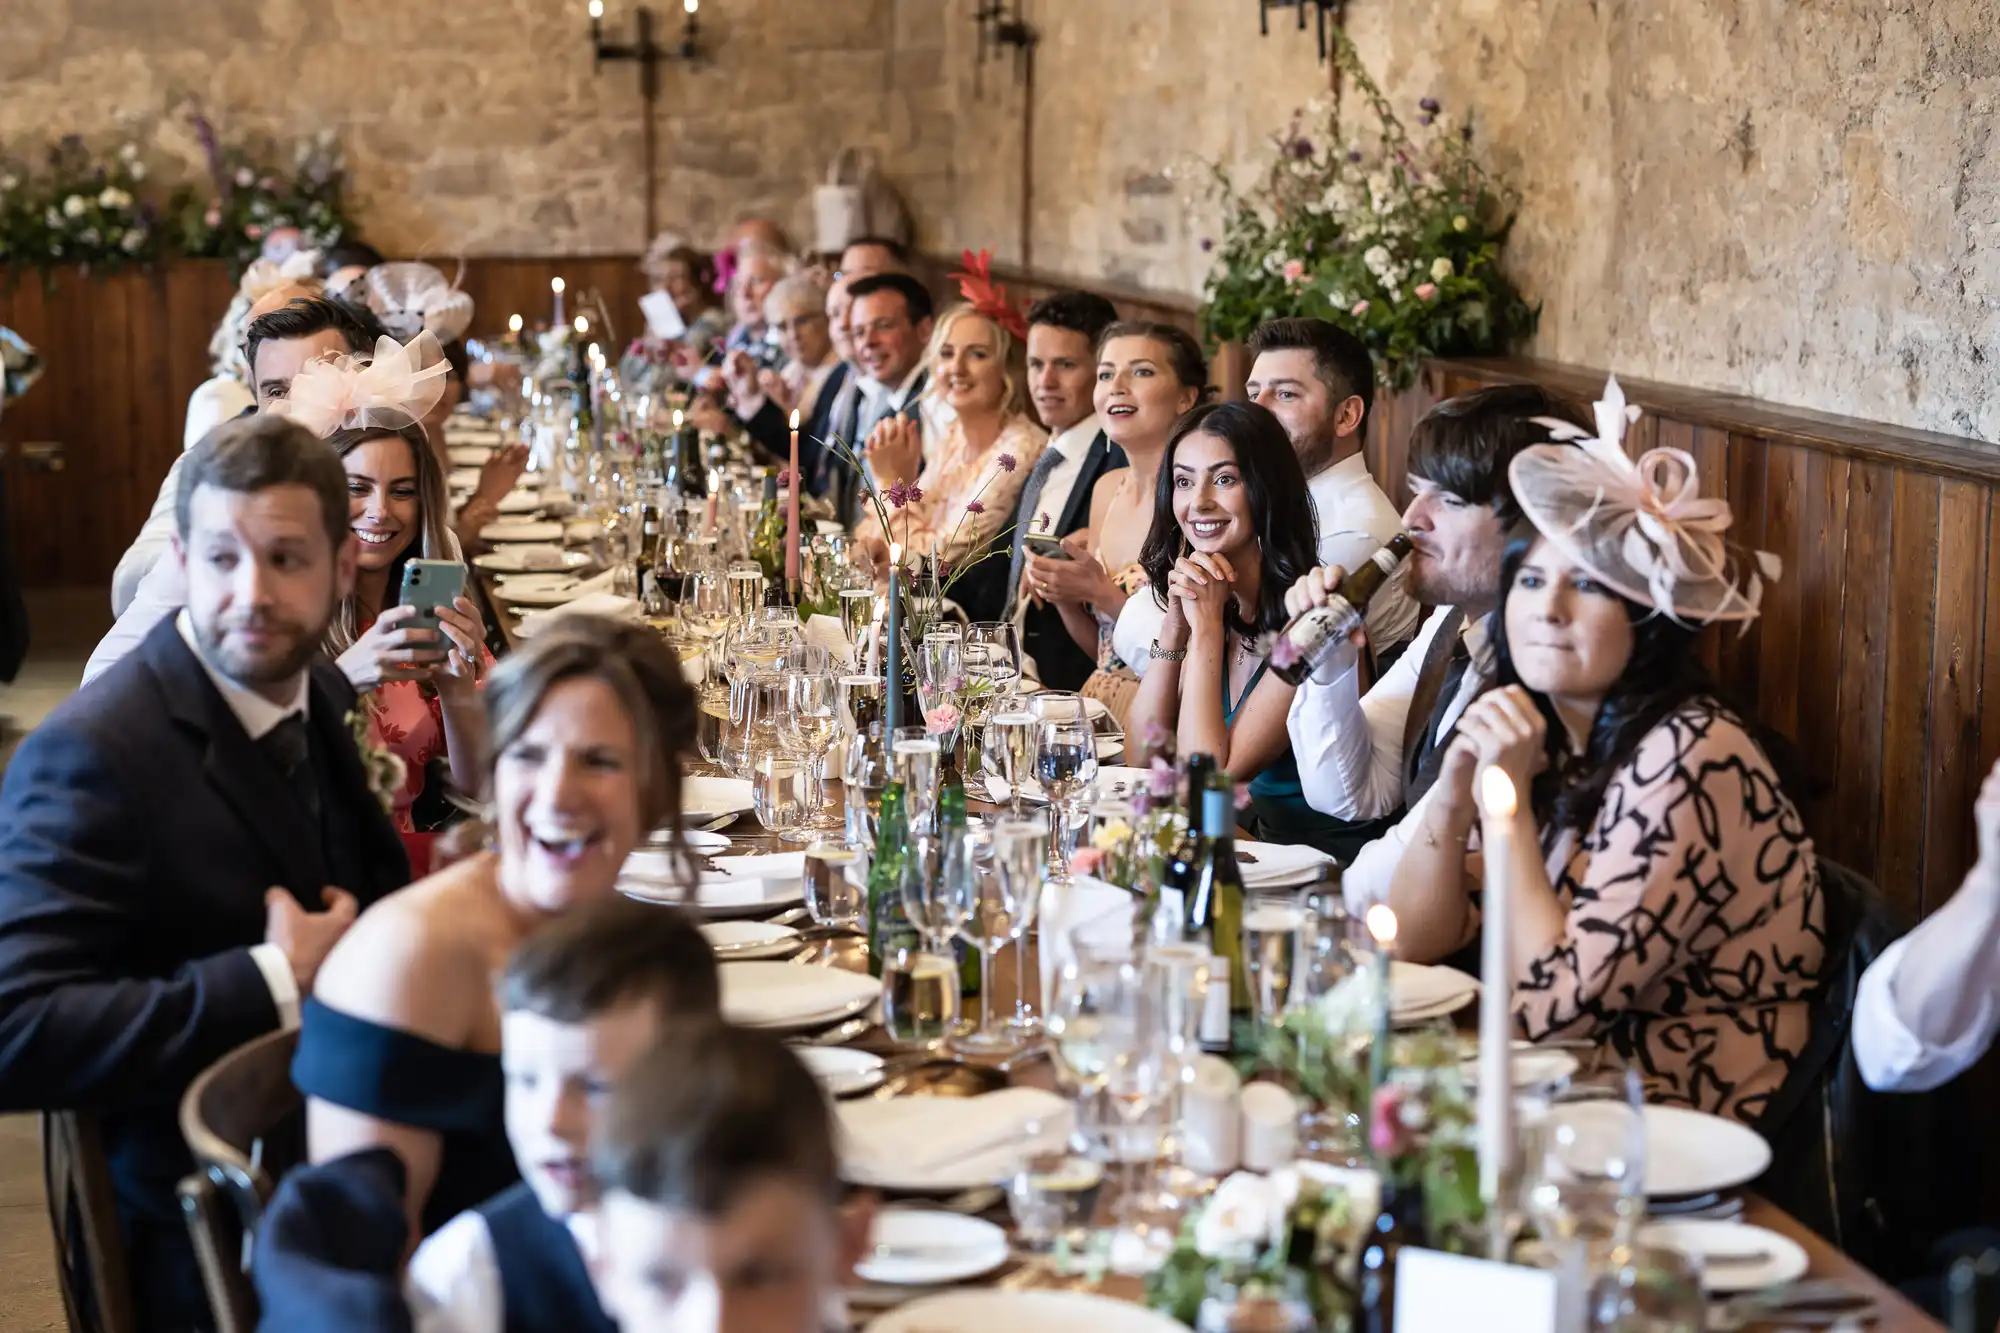 Guests at a long banquet table in a rustic setting, dressed in formal attire and interacting joyfully.